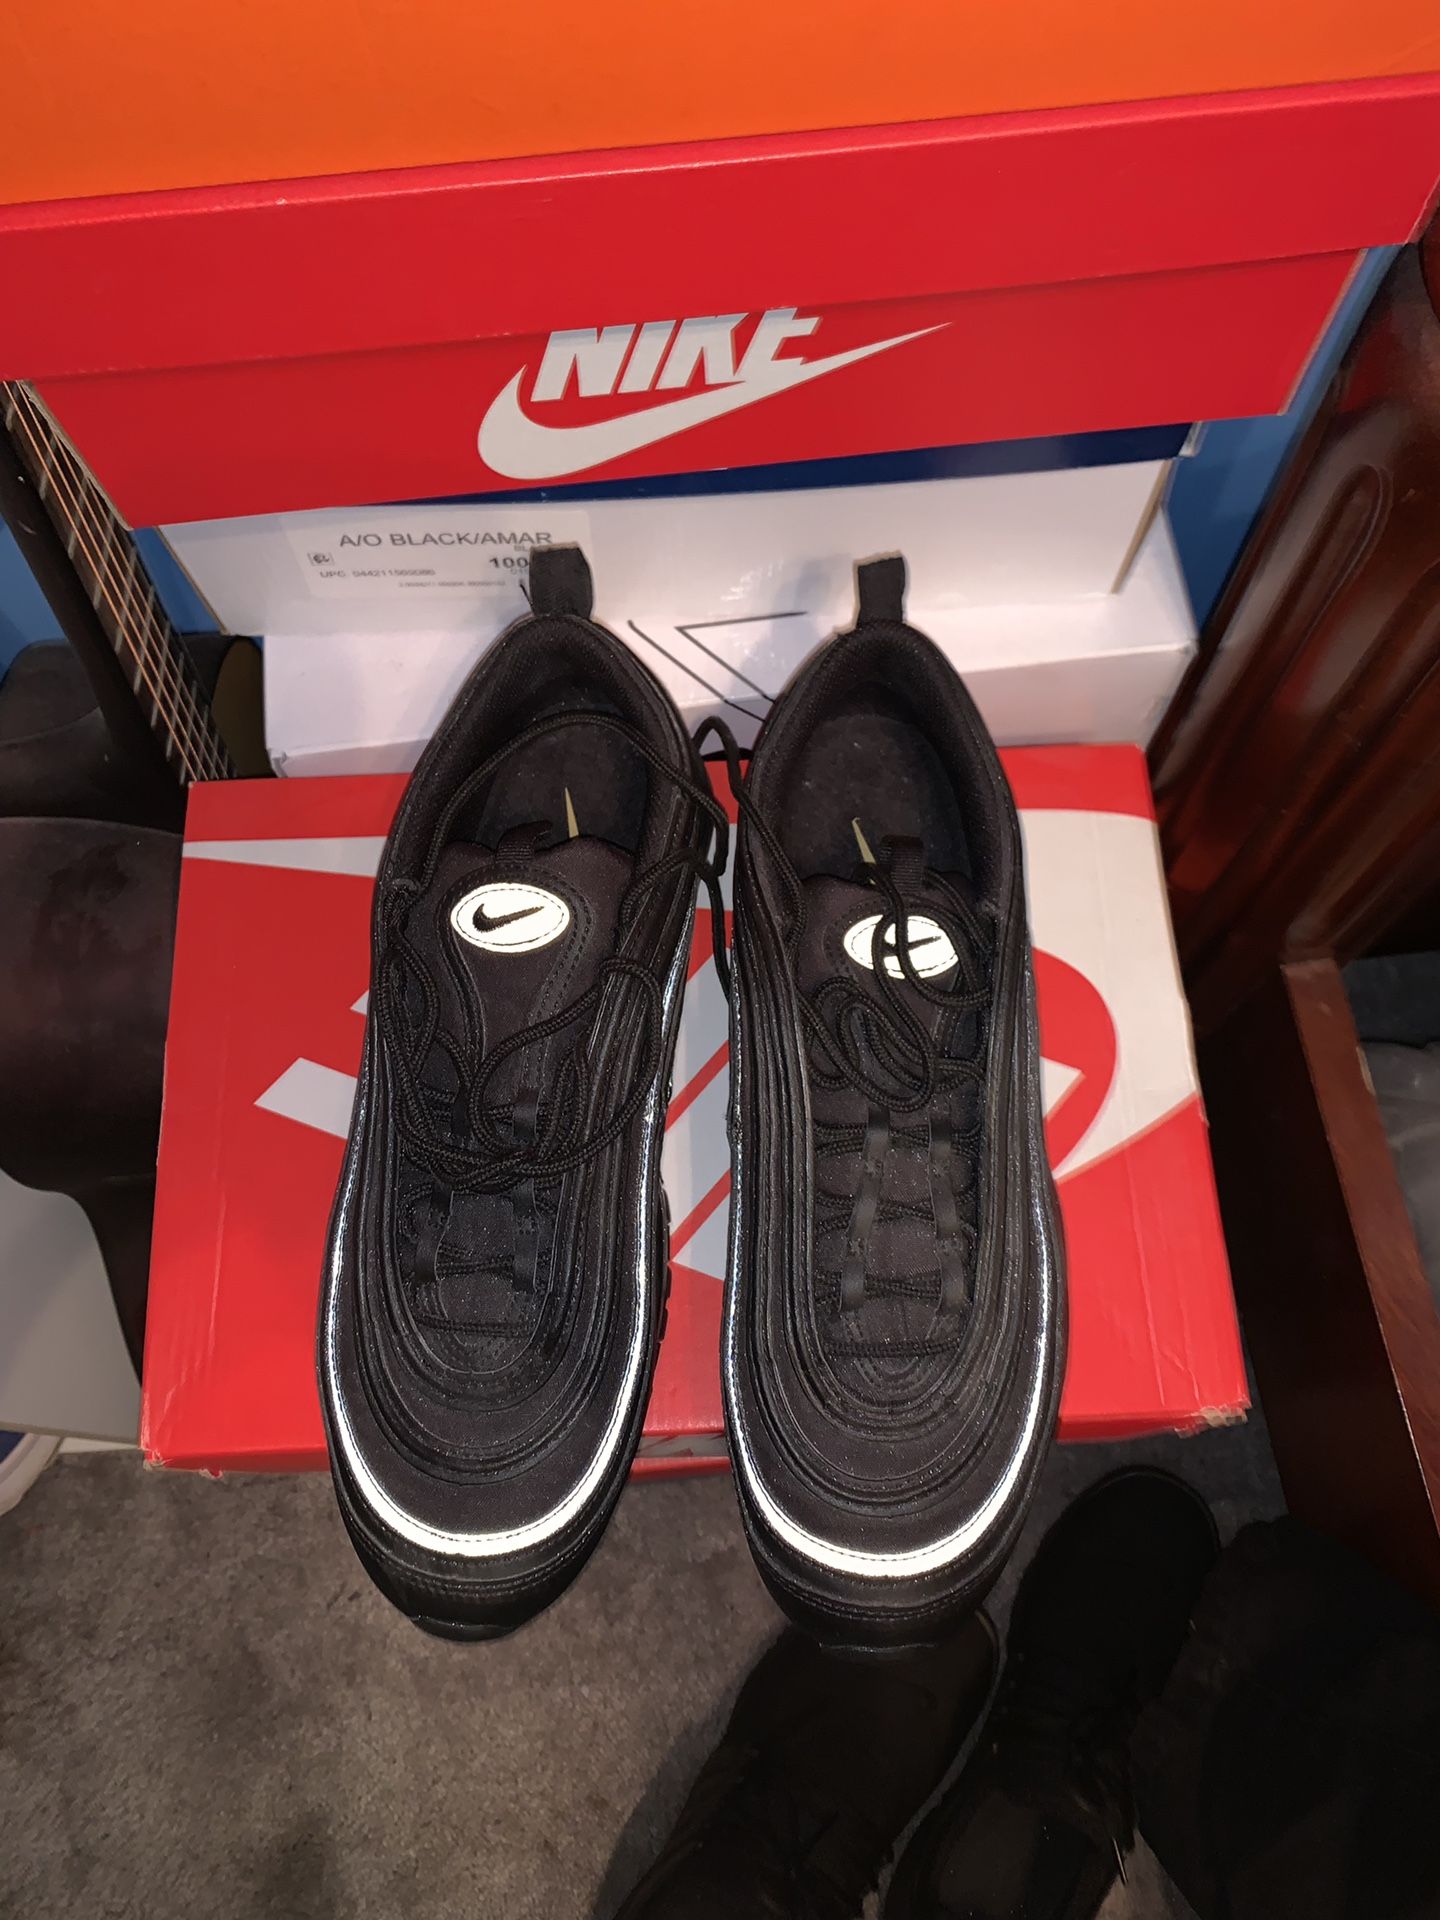 Nike Air MAX 97 PRM SE Need gone ! Collecting dust Sz.10